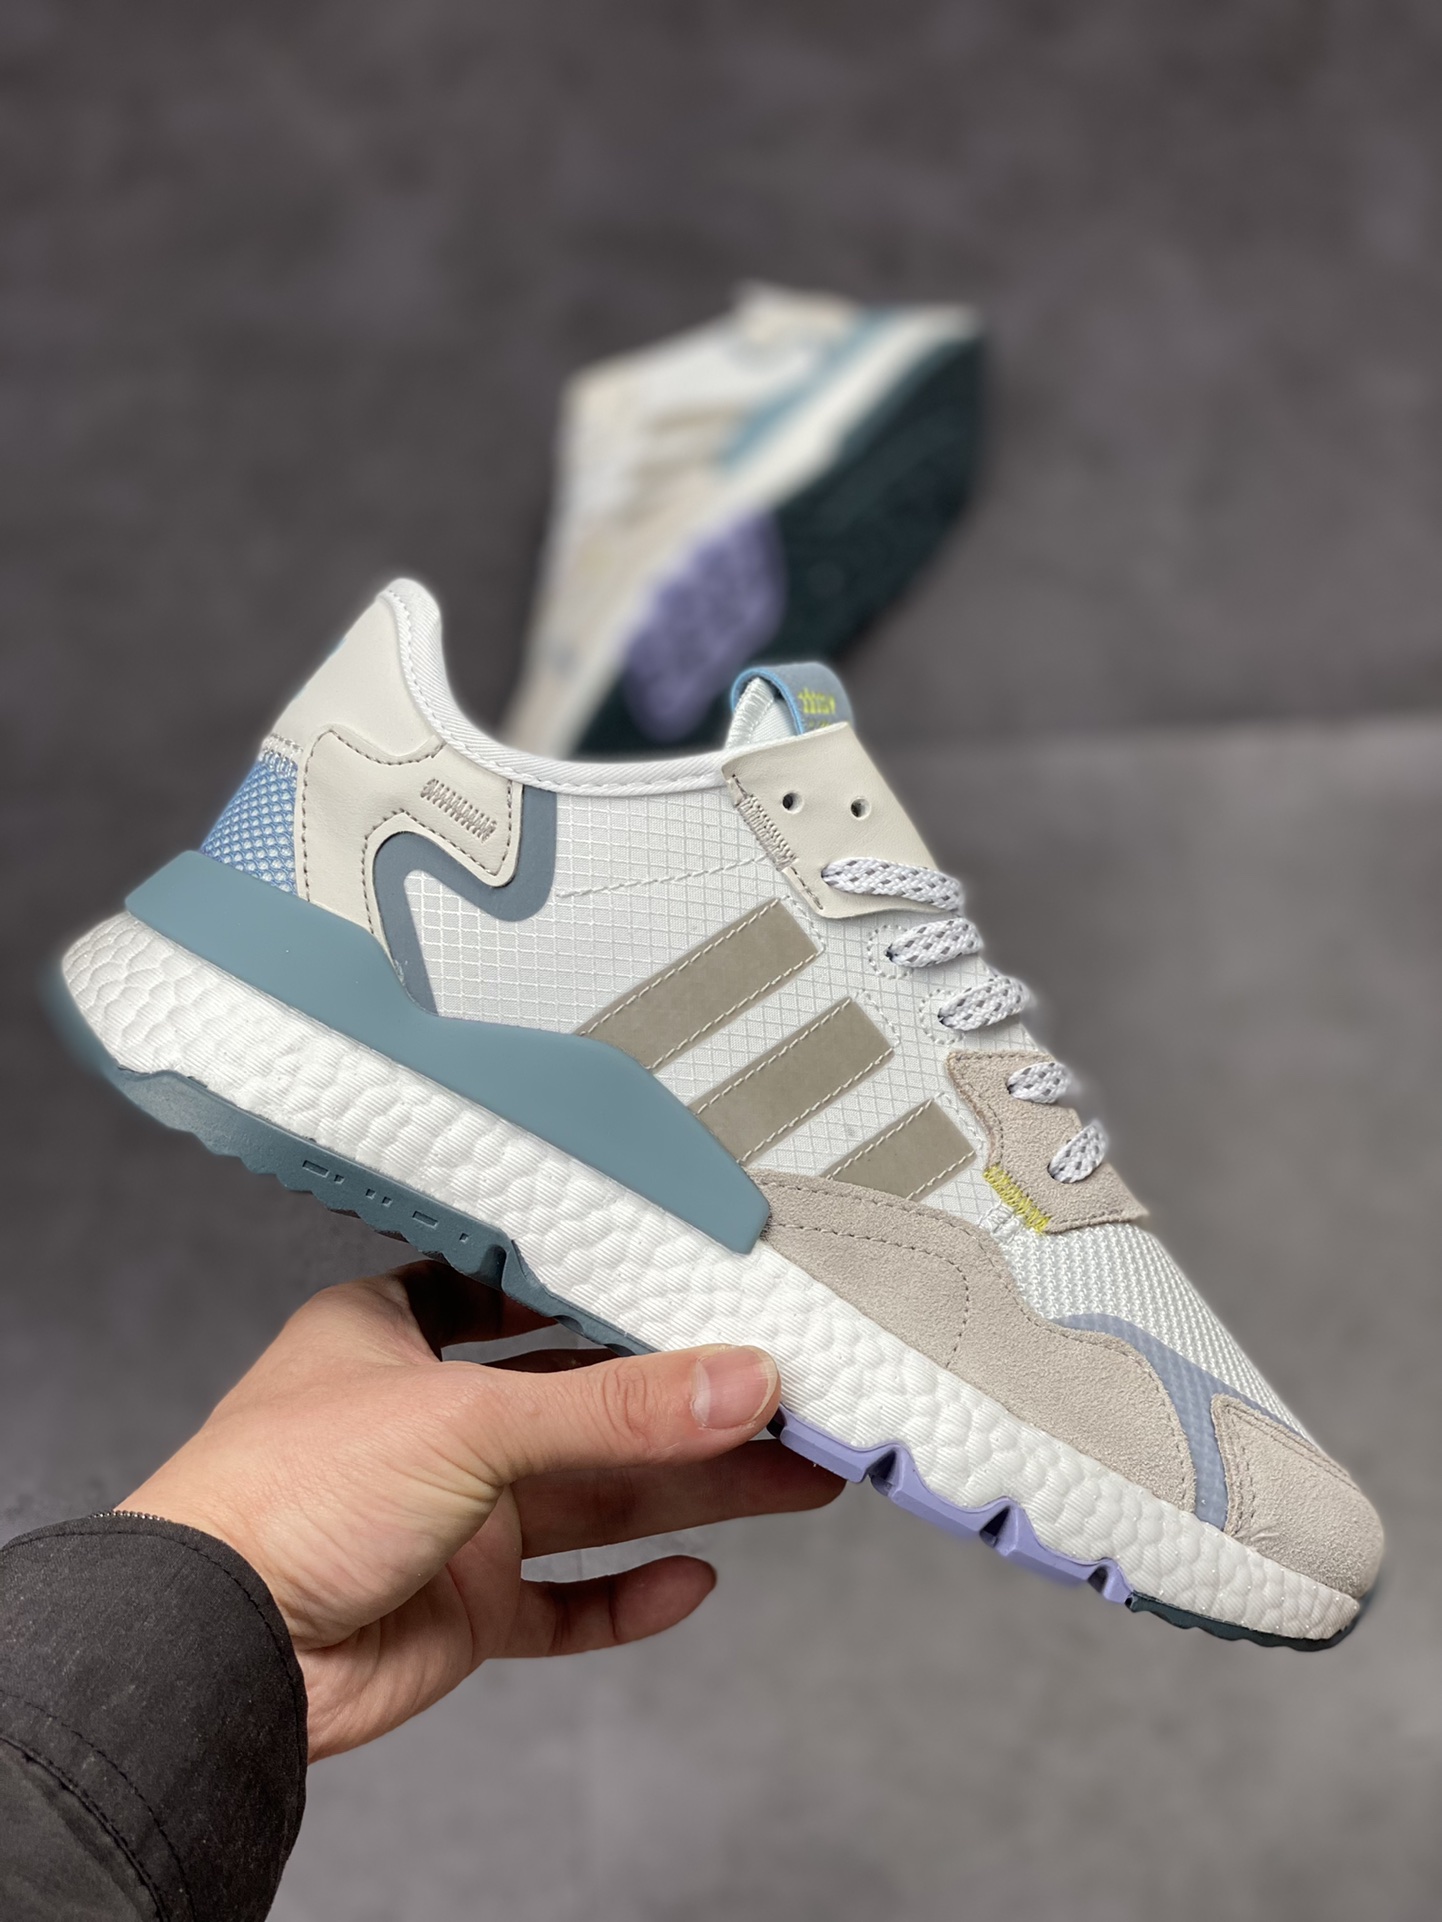 Adidas Nite Jogger 2019 Boost Clover Joint Night Walker IF0419